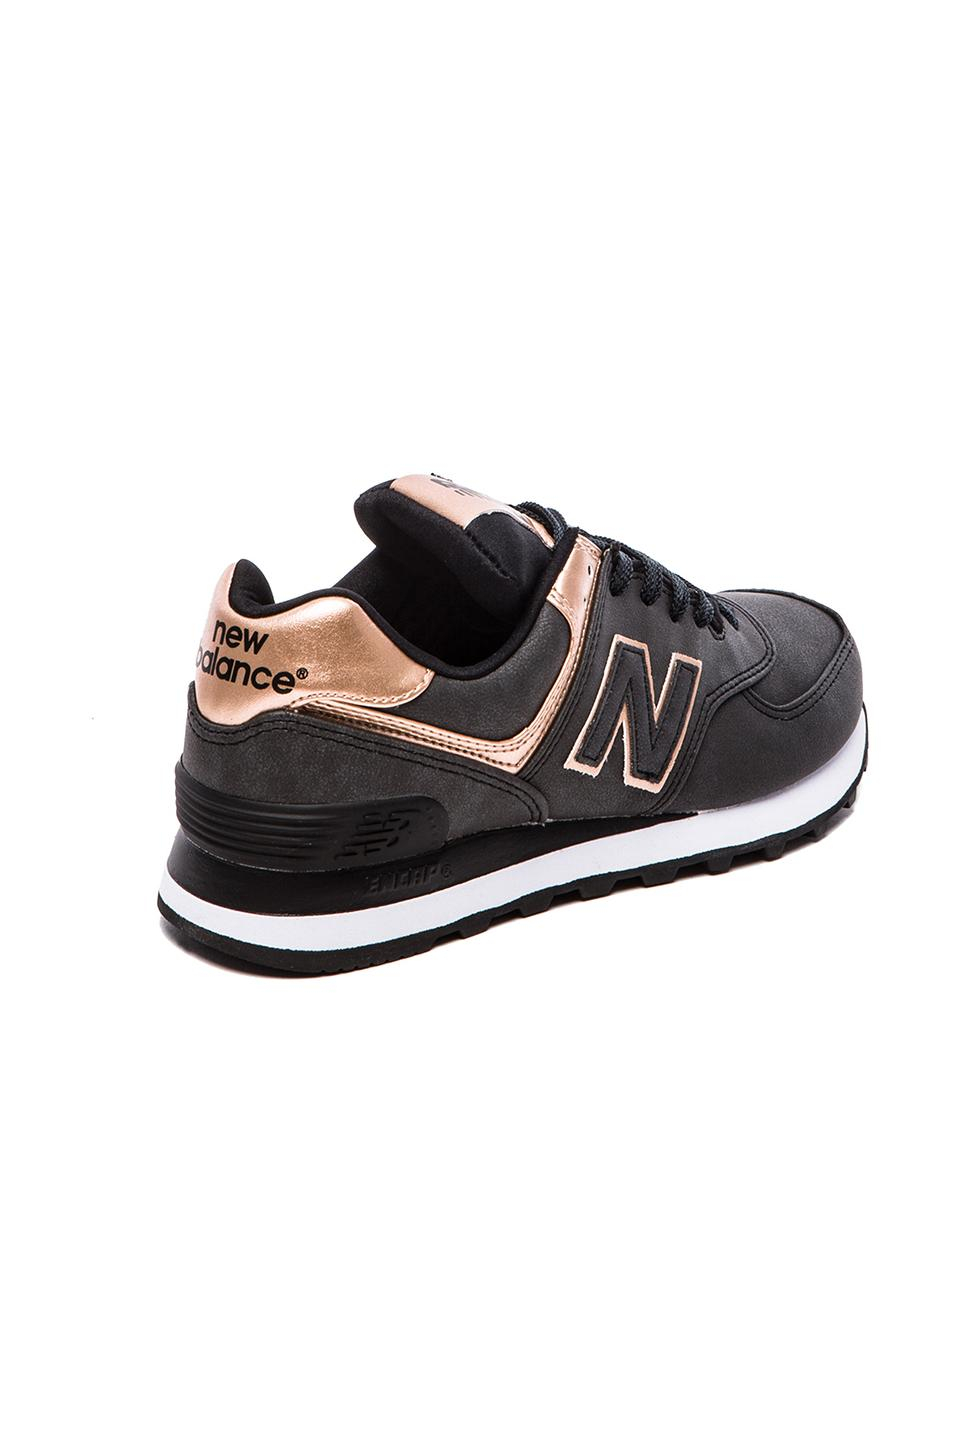 new balance 574 precious metals collection sneaker in charcoal